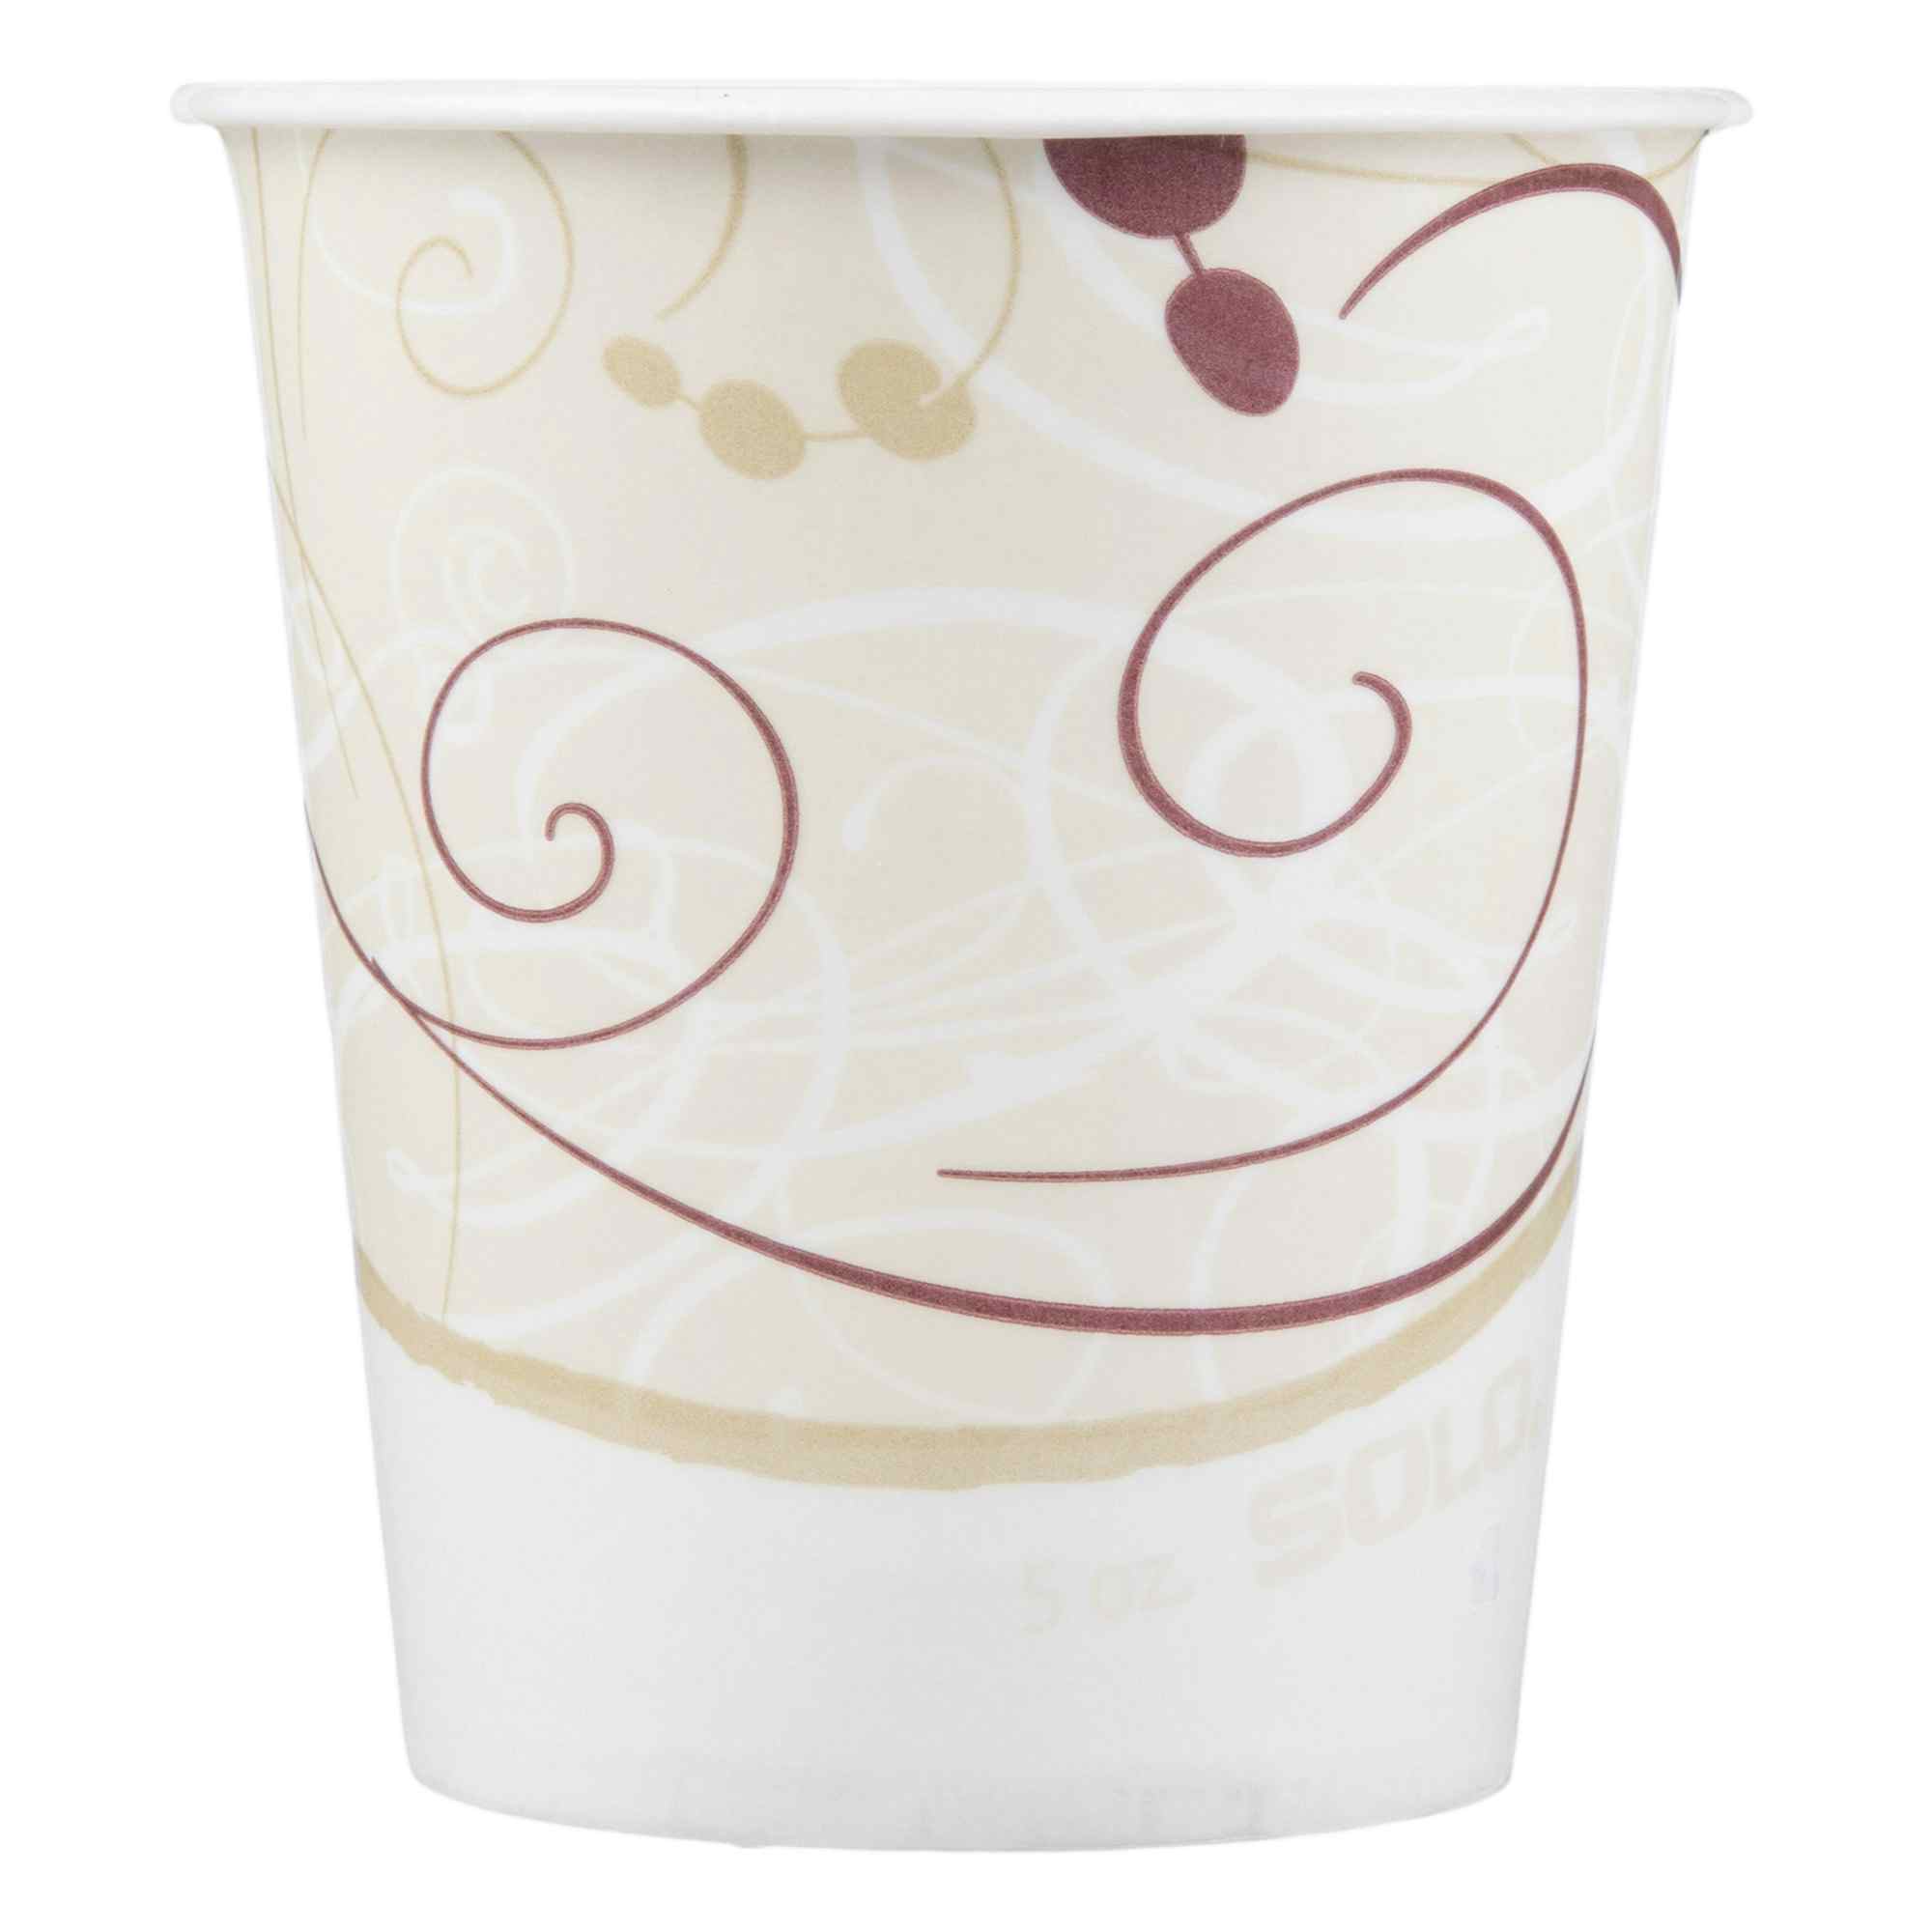 Solo Disposable Paper Drinking Cup, Symphony Print, R53-J8000, 5 oz - Sleeve of 100